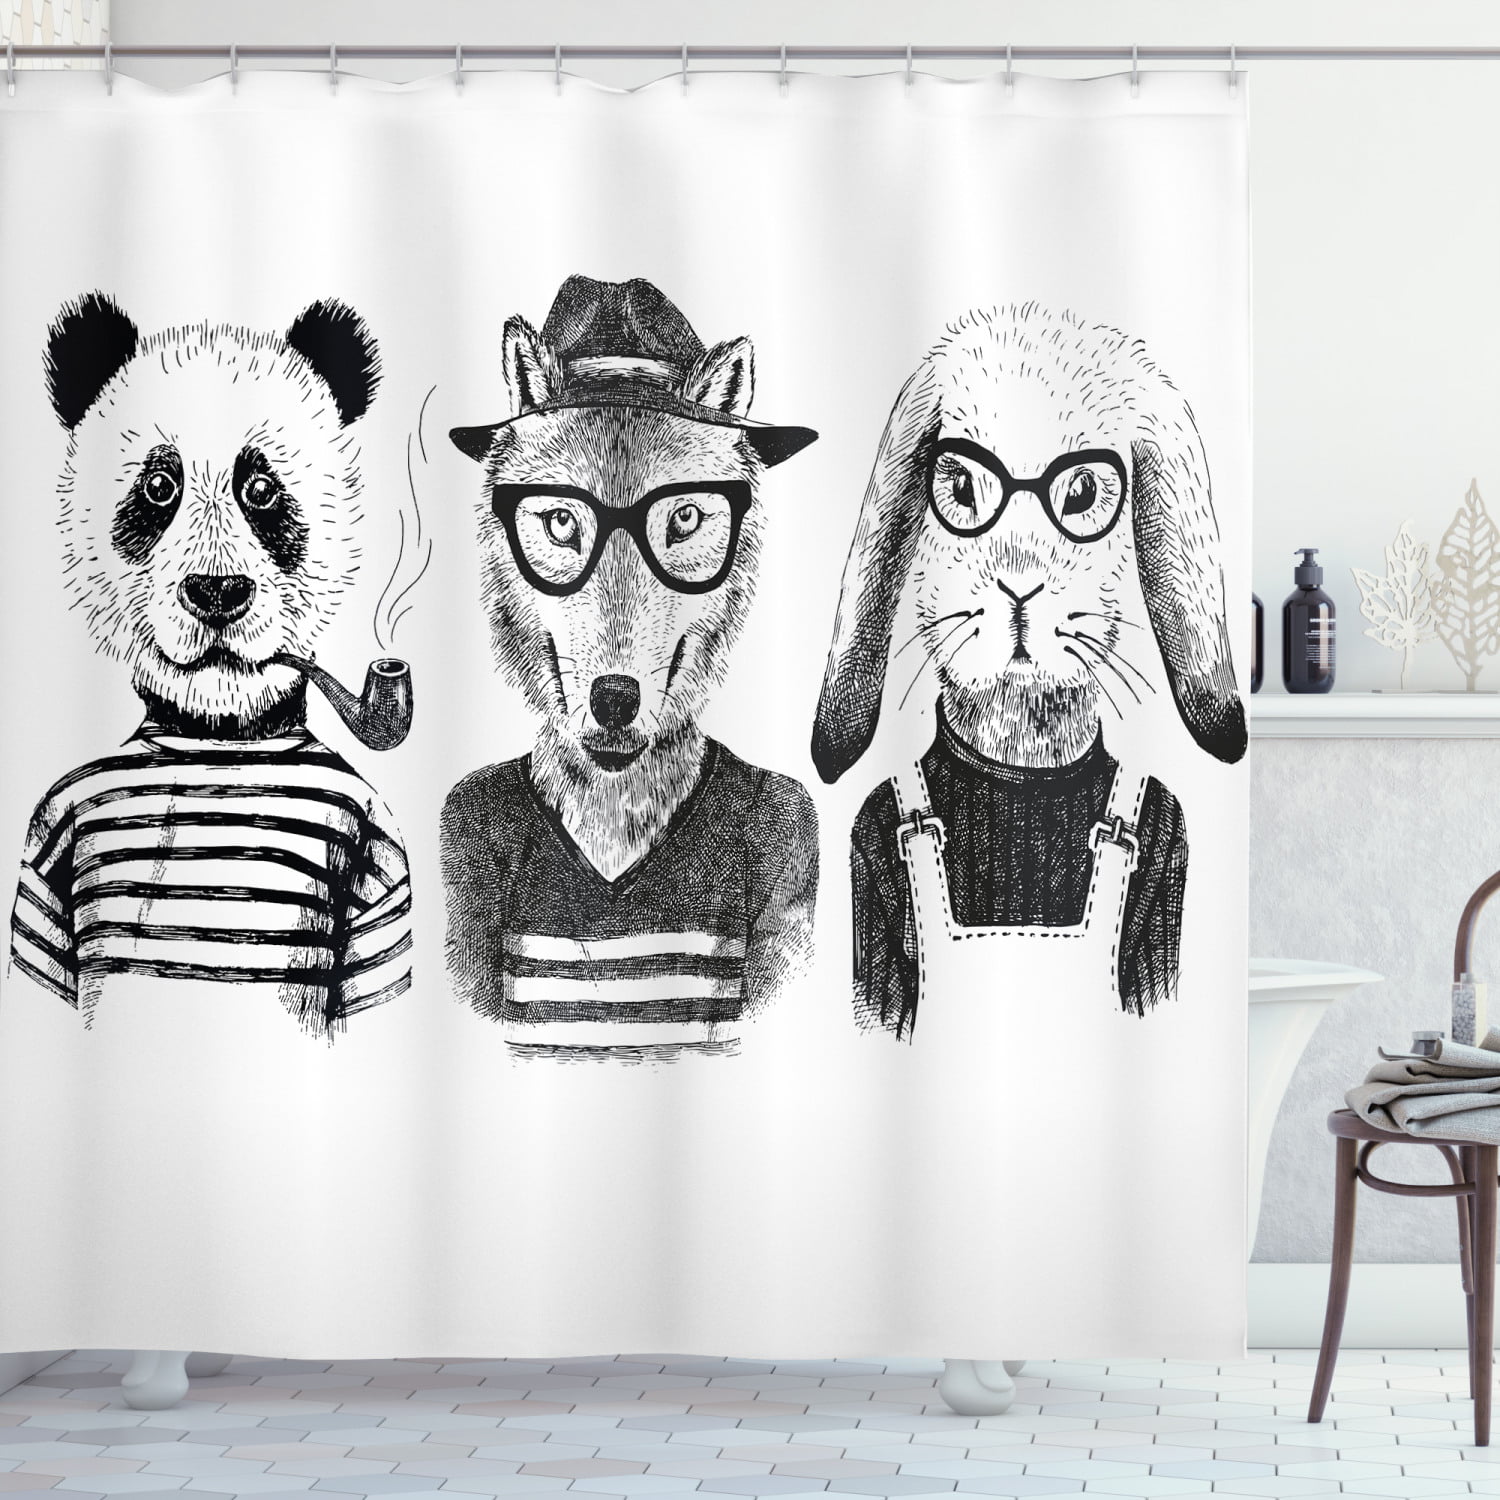 Whim-Wham Hipster Fashion Fox Shower Curtain Animals Fox Teacher Cartoon Colorful Spectacles Eyeglasses Waterproof Shower Curtain Set with 12 Hooks.